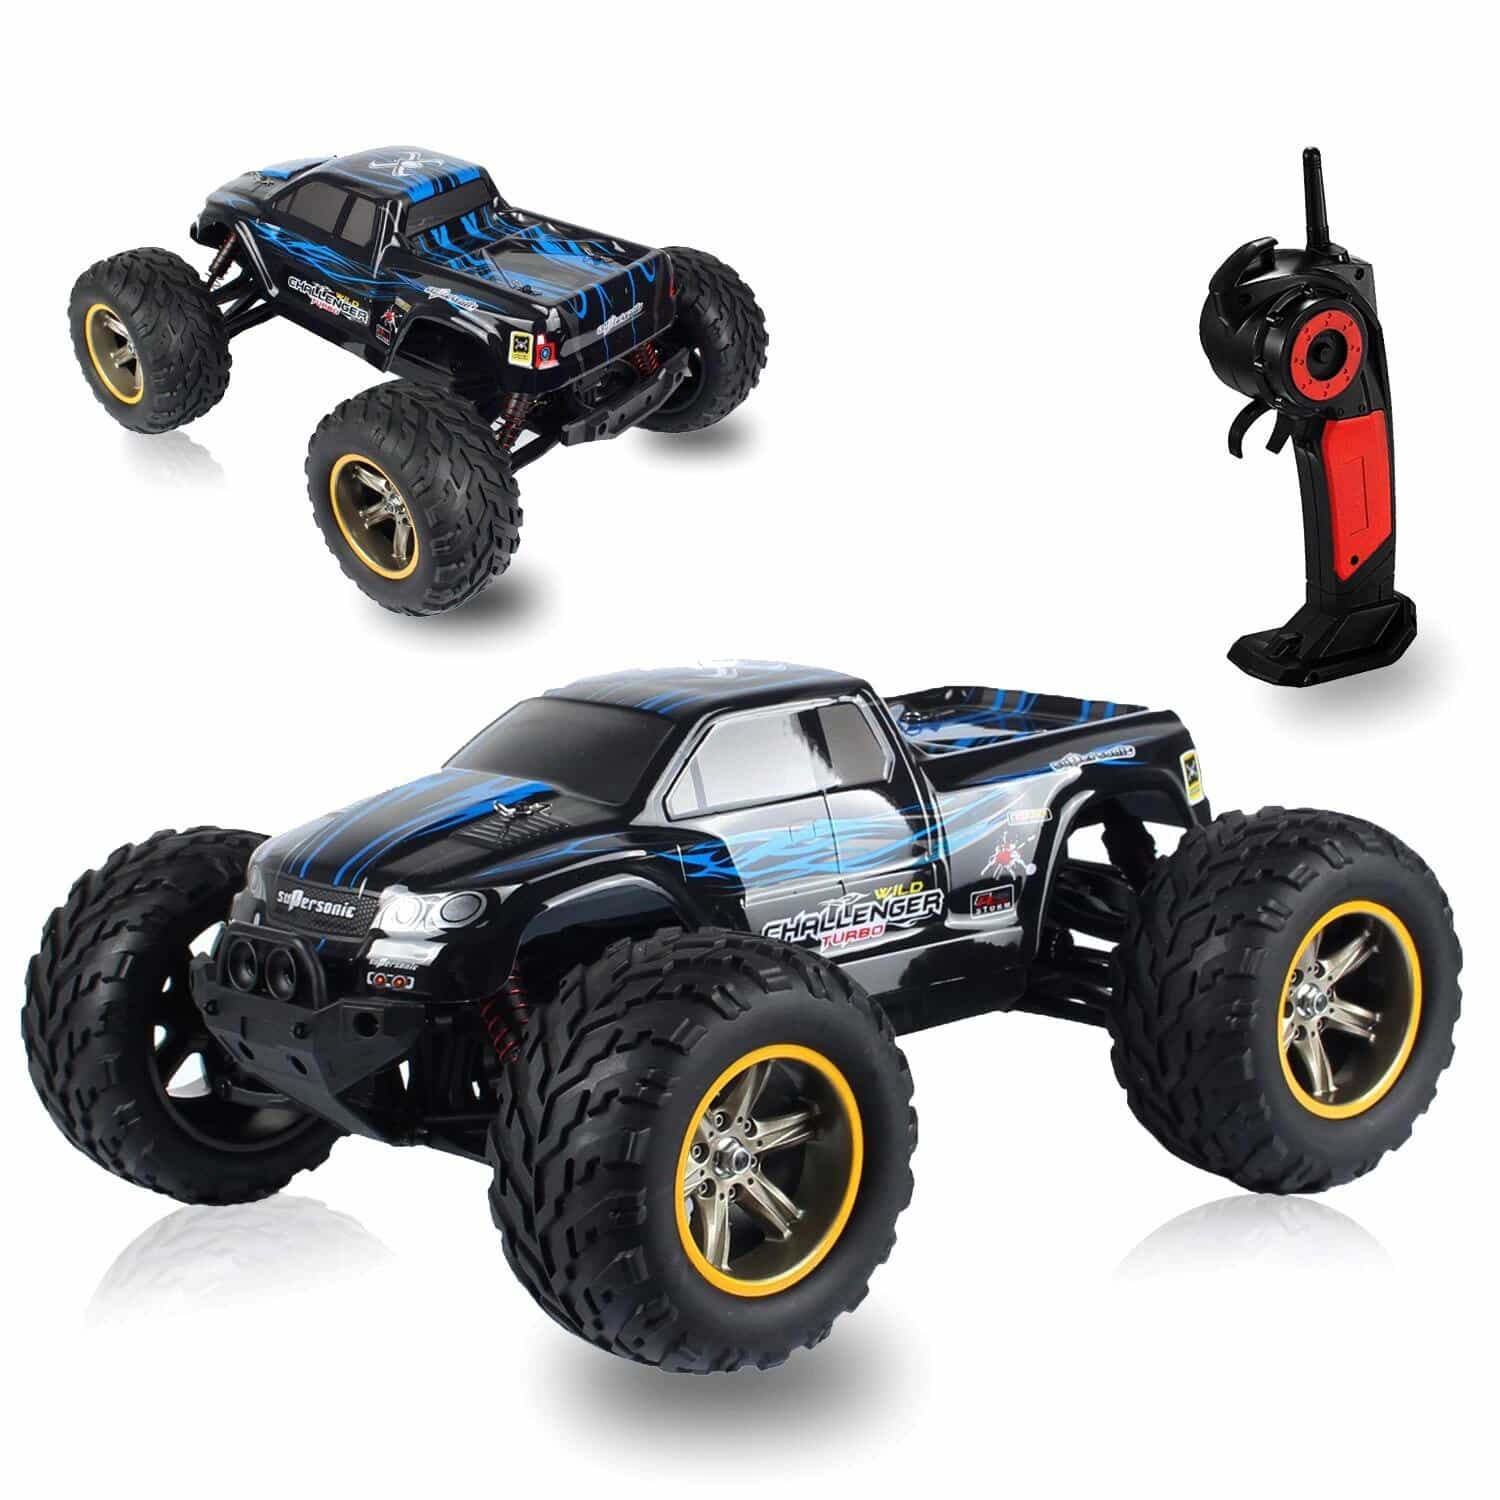 AMOSTING S911 33MPH 2 4GHz 2WD Off Road Waterproof Monster RC Truck 1 12 Scale Review